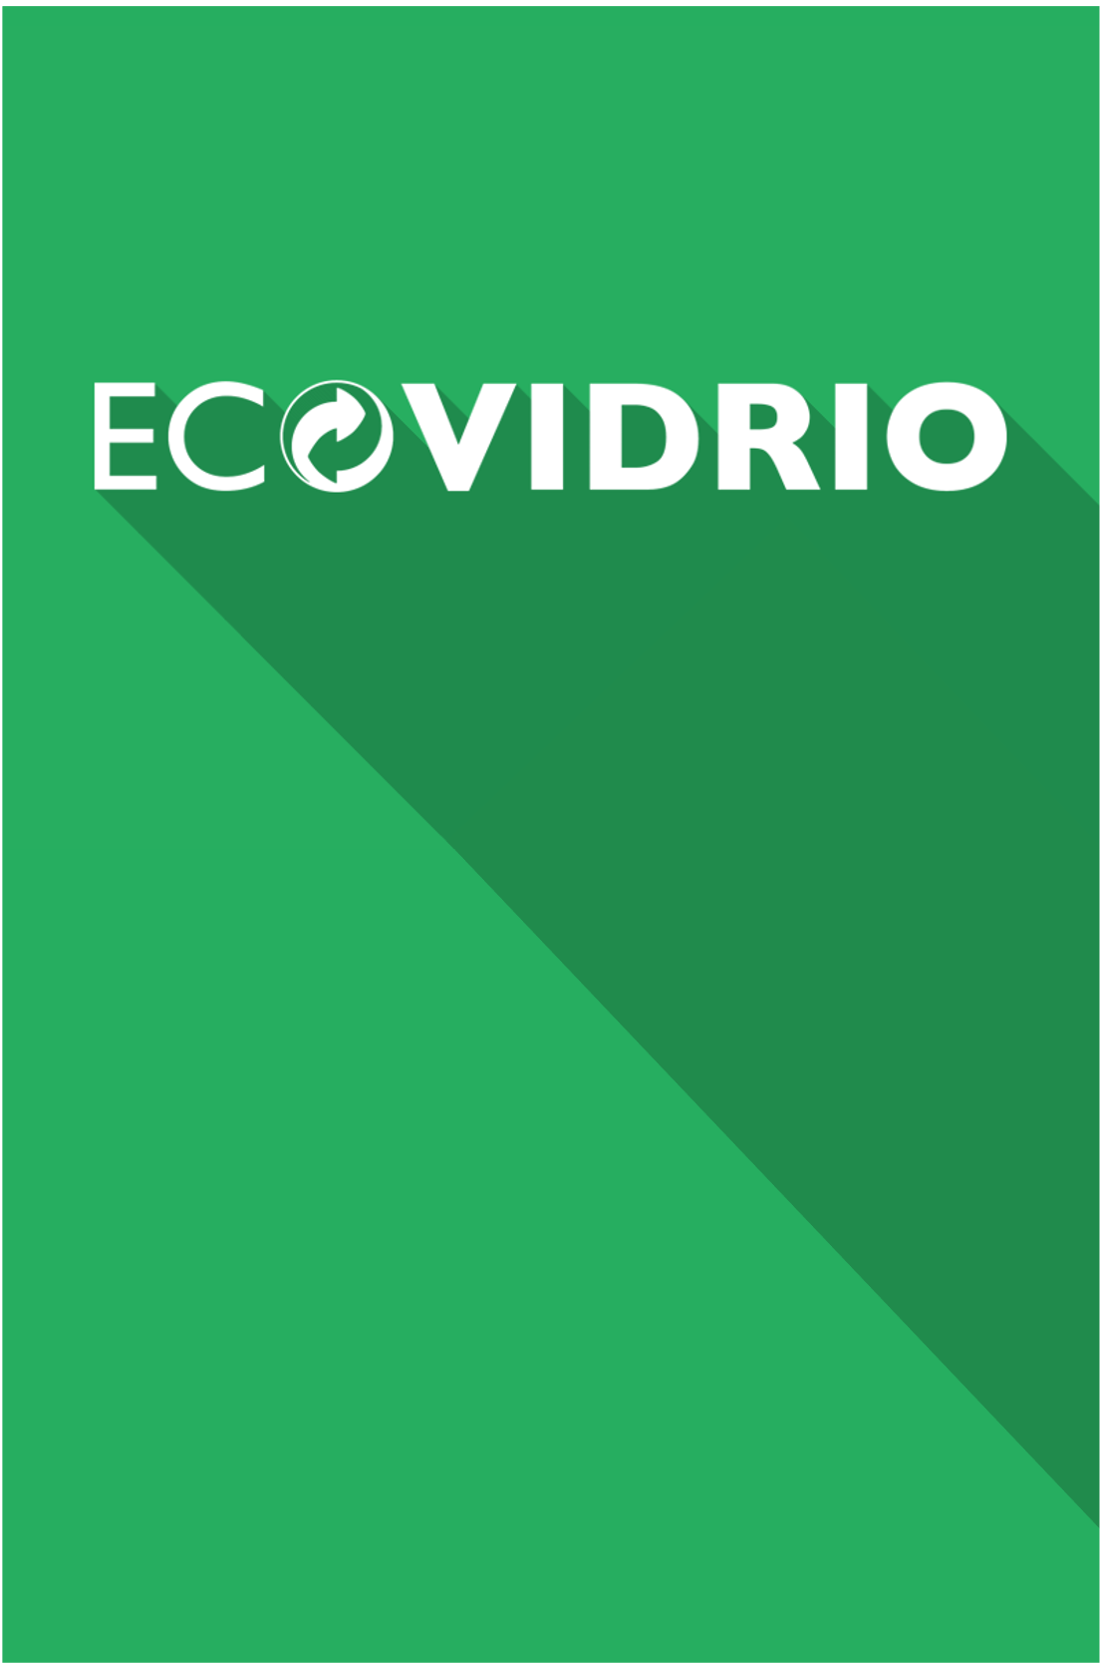 Ecovidrio – Enough with the excuses